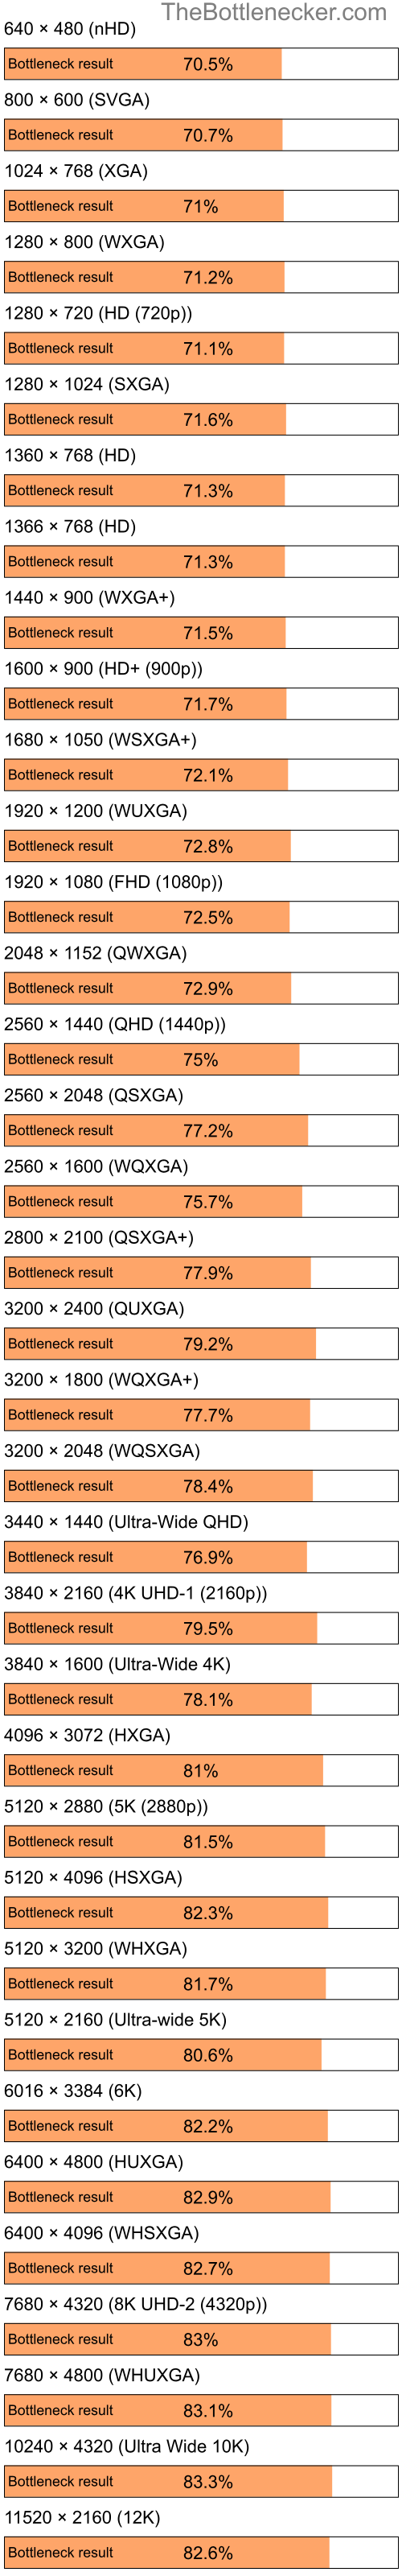 Bottleneck results by resolution for Intel Pentium 4 and NVIDIA GeForce 8400M G in General Tasks